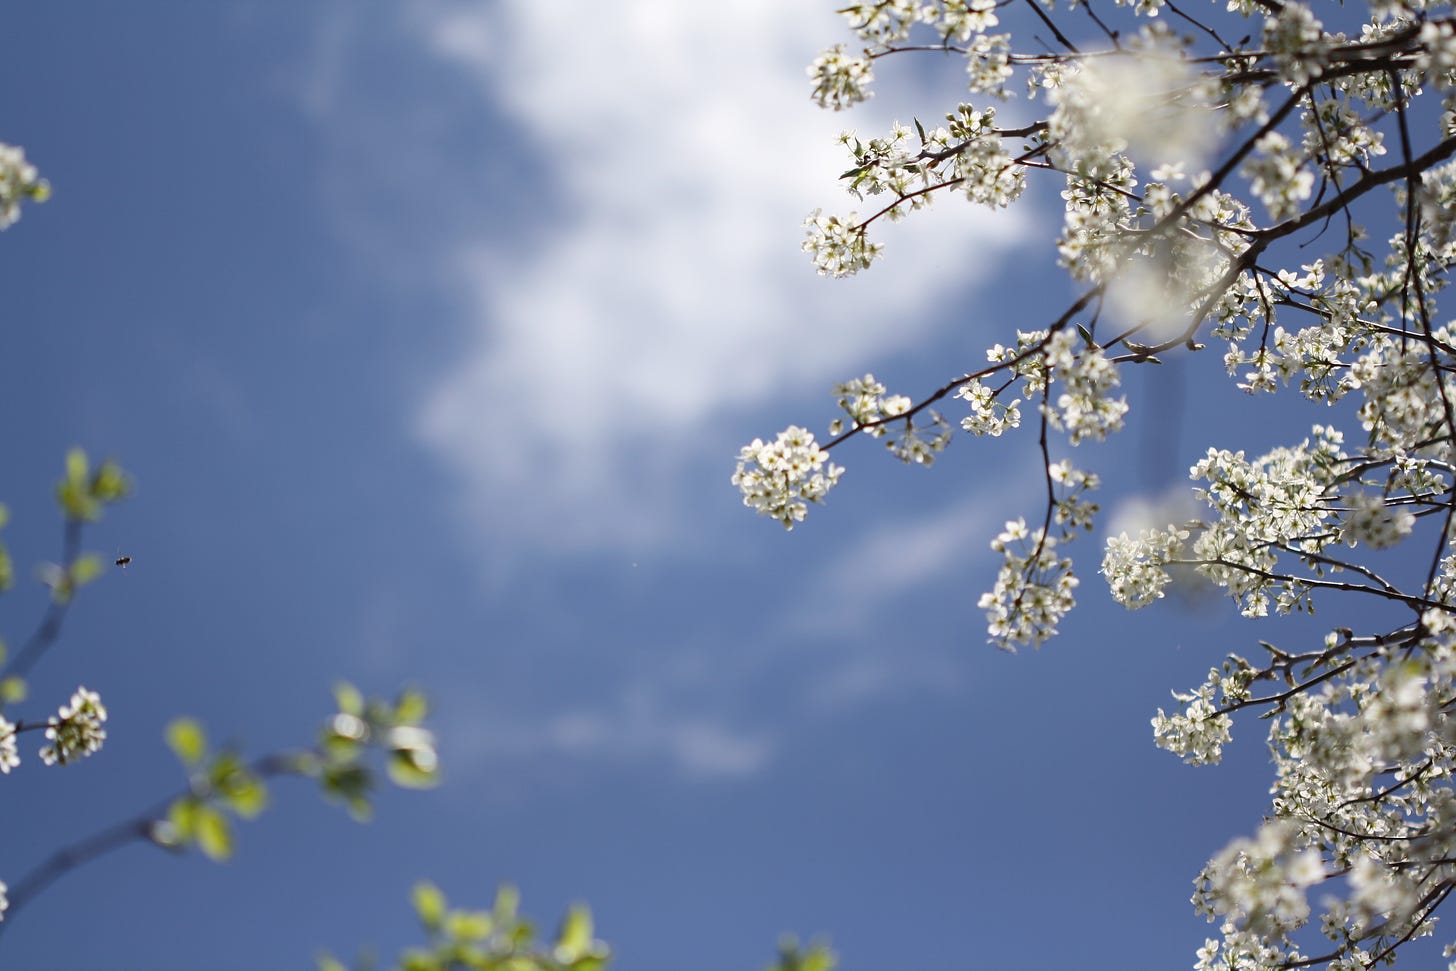 white pear blossoms fill the branches of a tree framed against a blue sky with white cloud